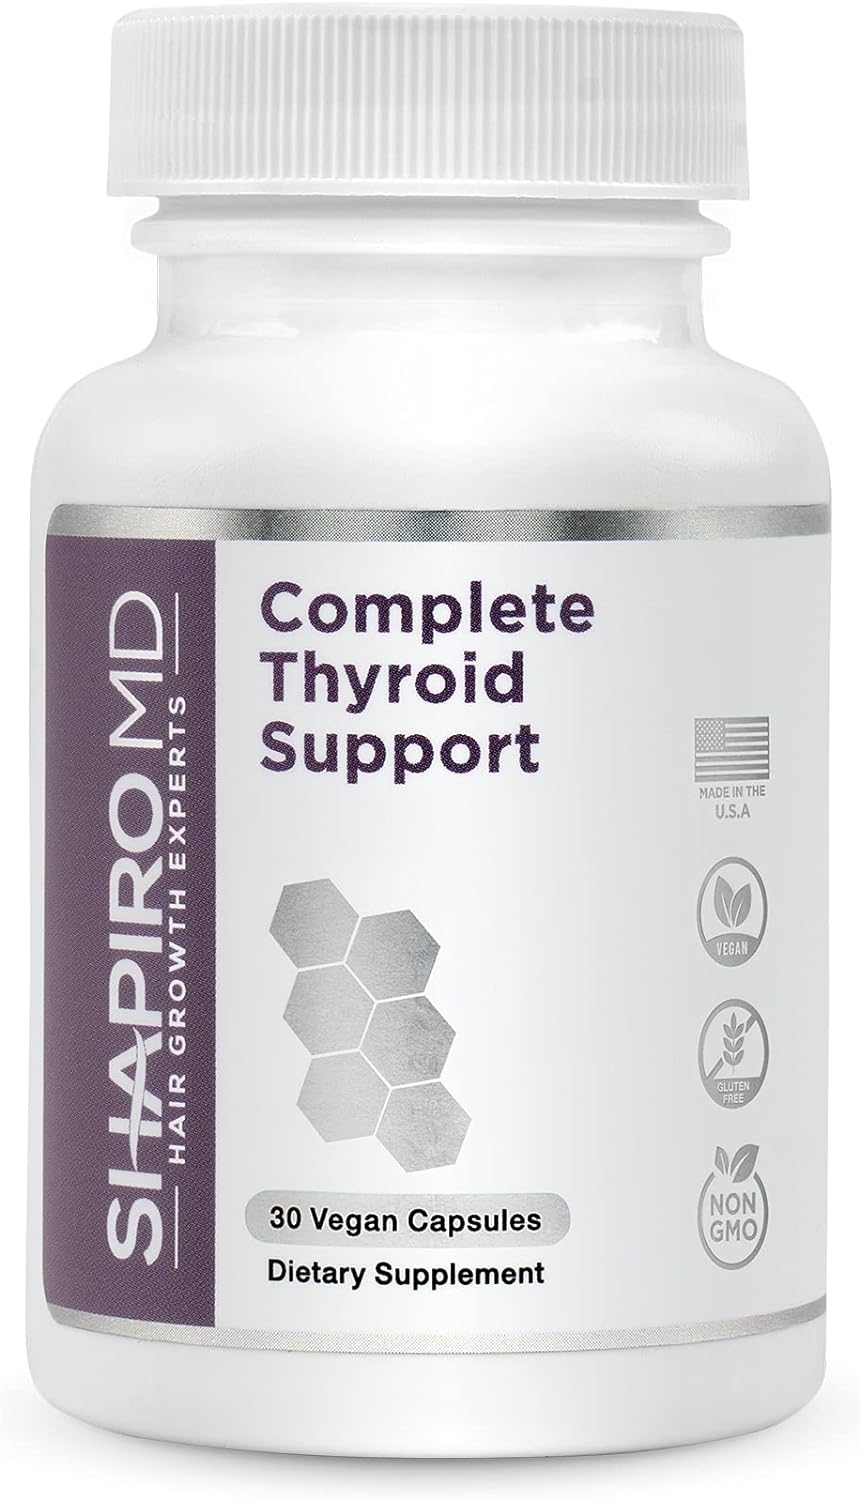 Complete Thyroid Support Supplement with Iodine for Women - Vegan Formula for Energy and Focus with Vitamin B12, Selenium, L-Tyrosine | Shapiro MD (1 Month (30 Capsules))